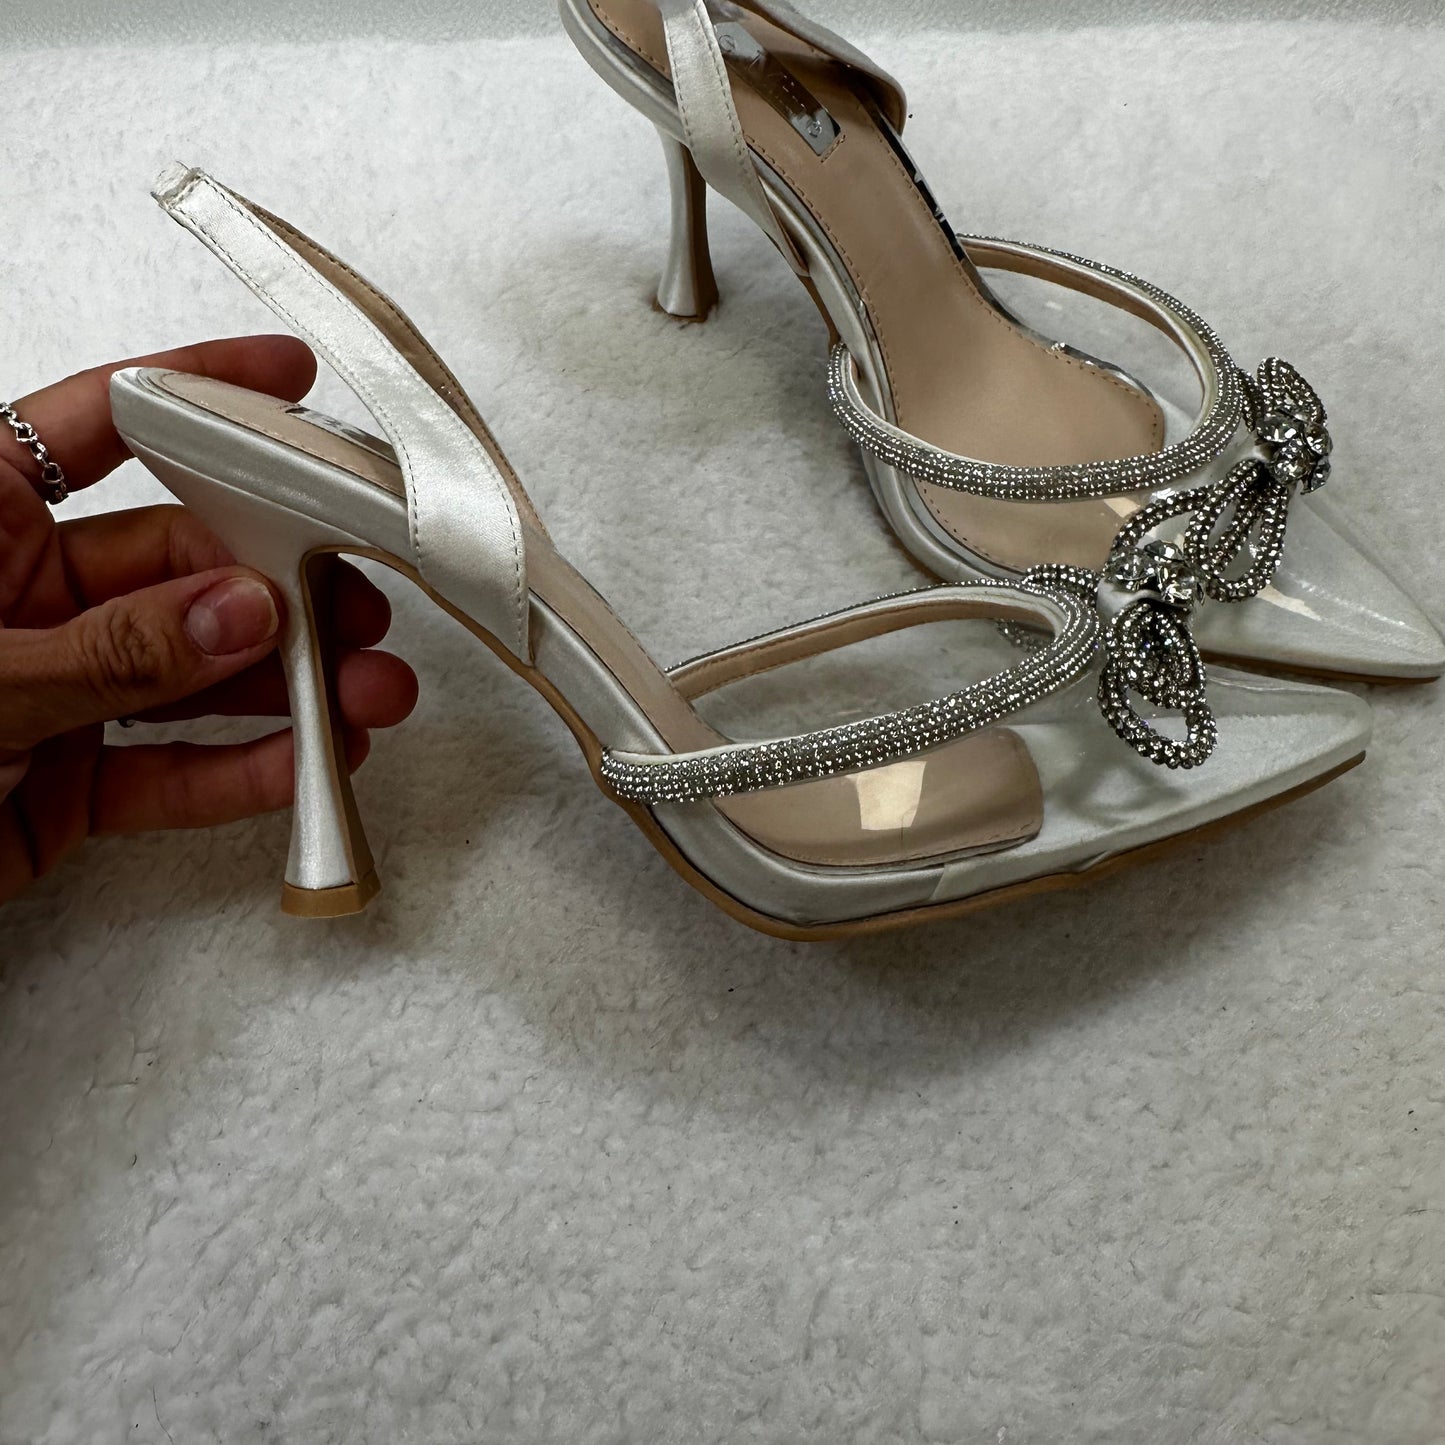 Pearl Shoes Heels Stiletto Clothes Mentor, Size 6